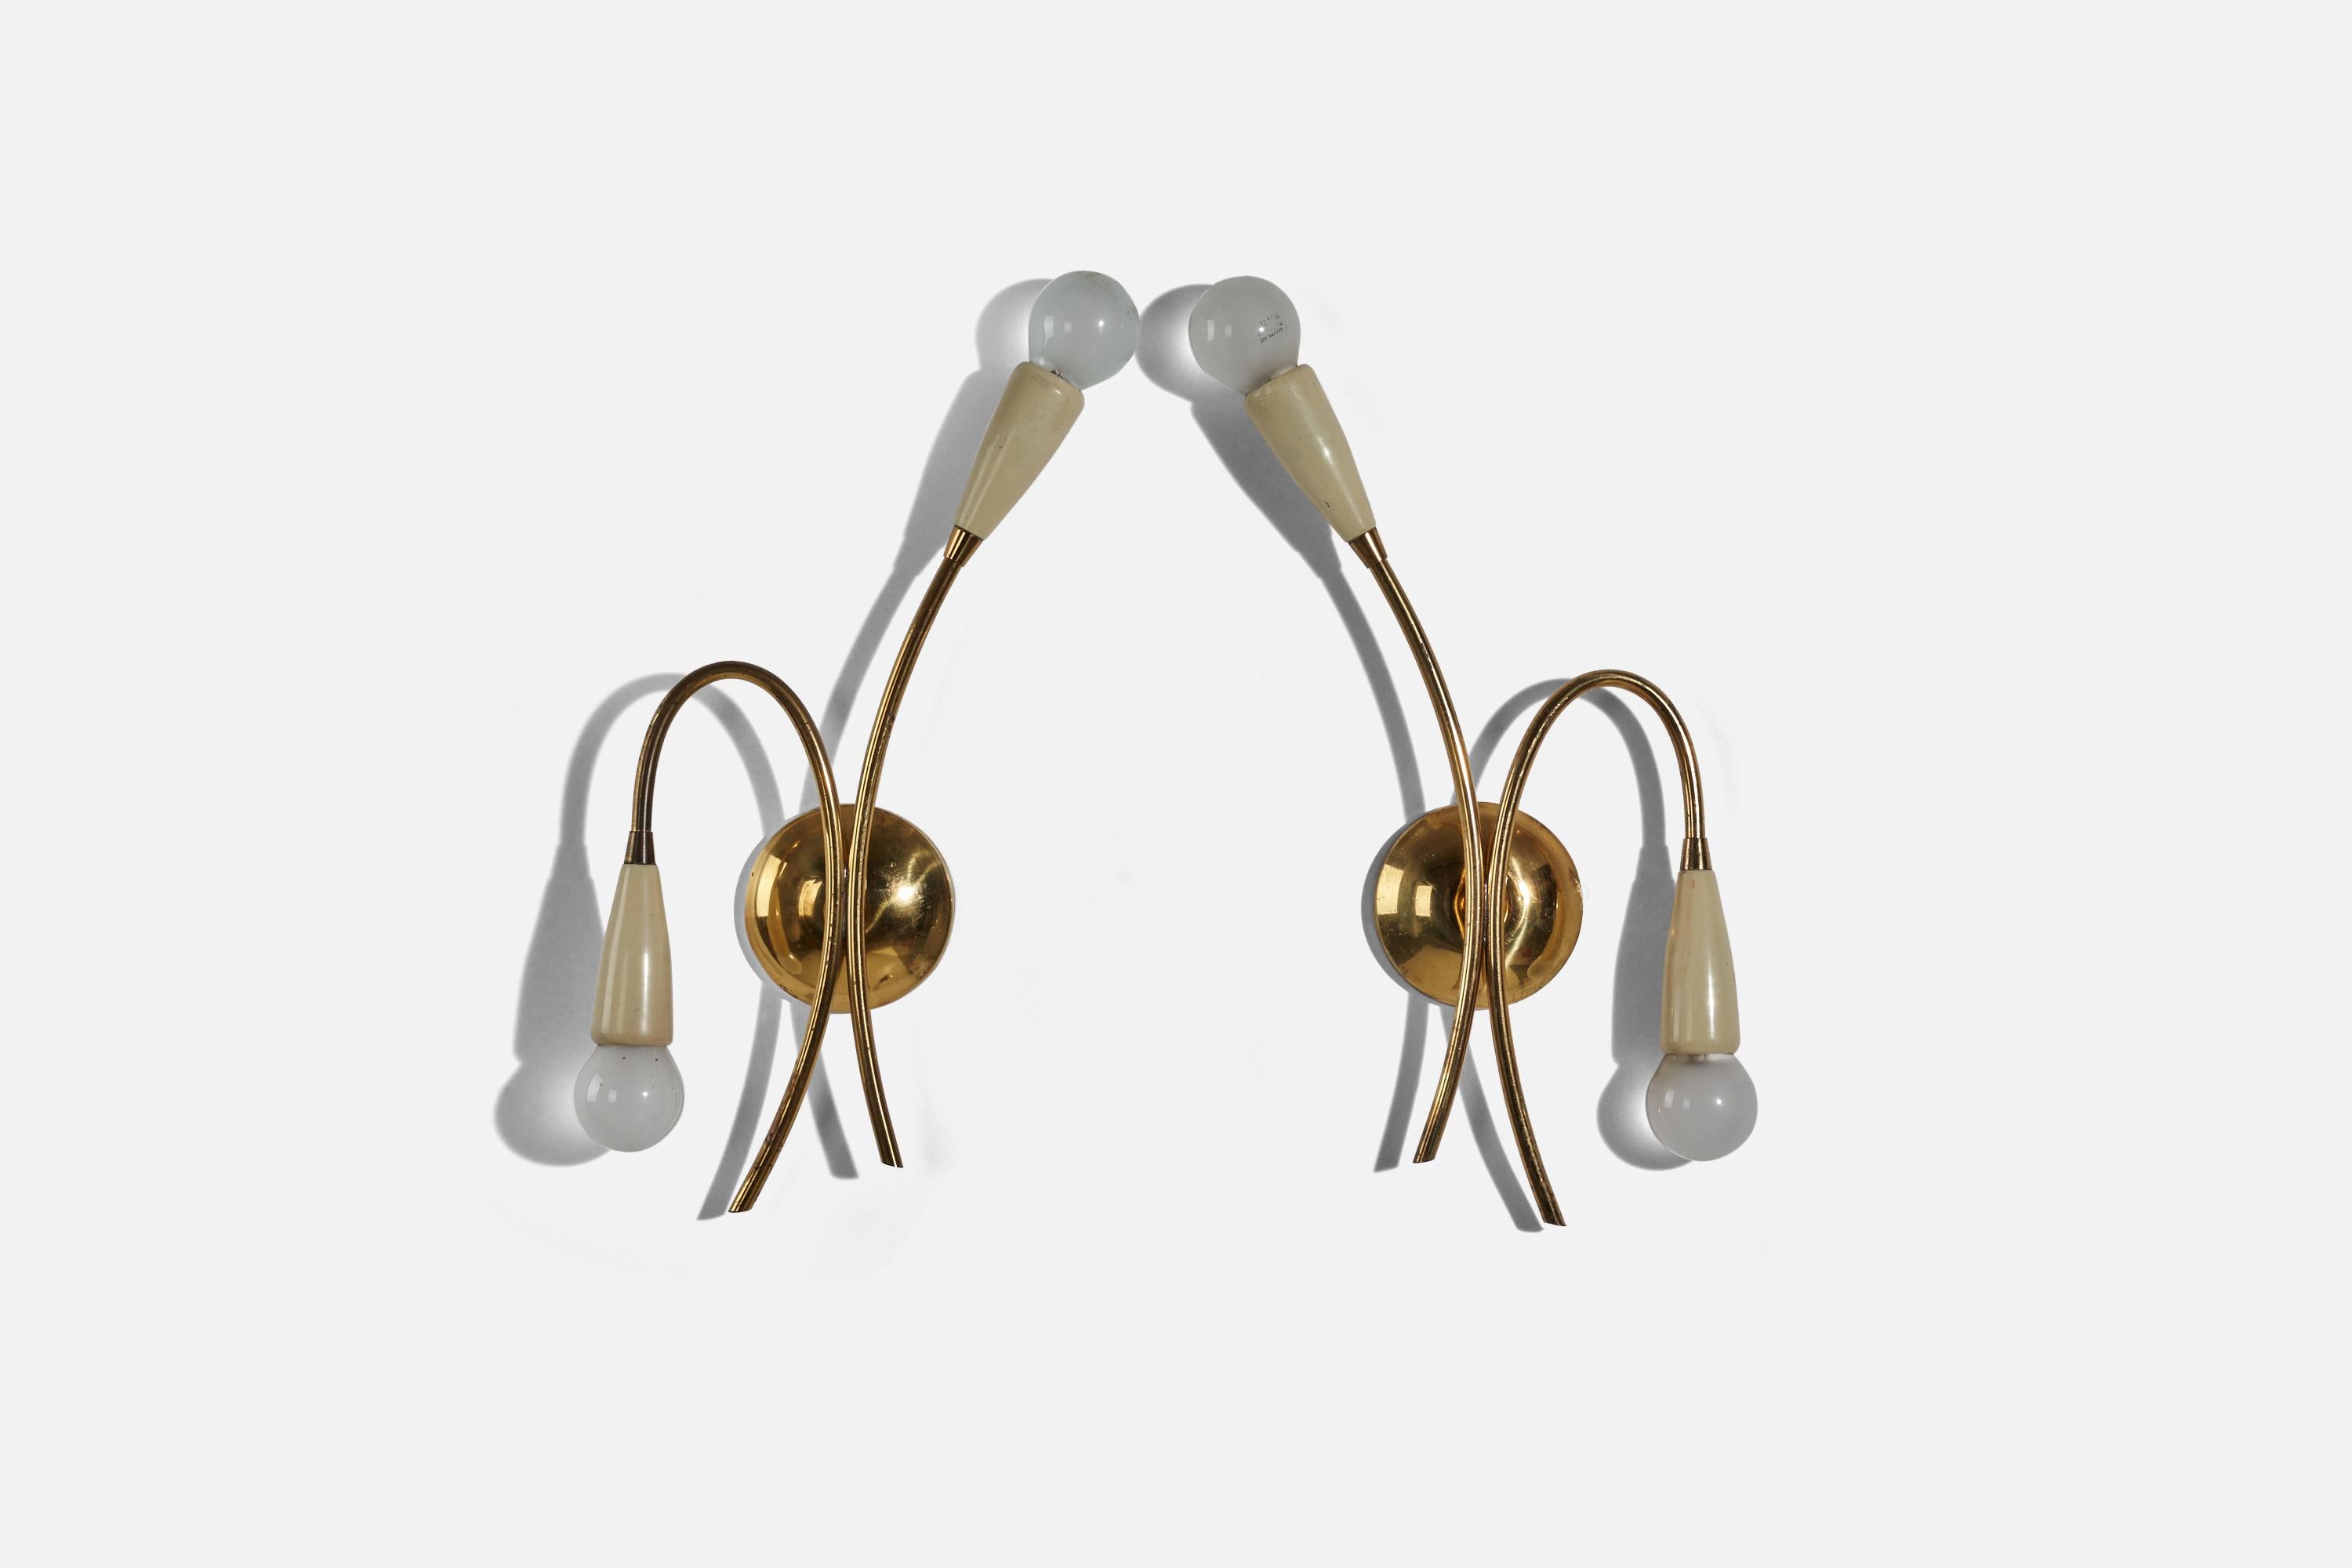 A pair of brass and metal sconces/ wall lights designed and produced by an Italian designer, Italy, 1950s.

Dimensions of back plate (inches) : 3.37 x 3.37 x 0.86 (height x width x depth)

Socket takes E-14 bulb.

There is no maximum wattage